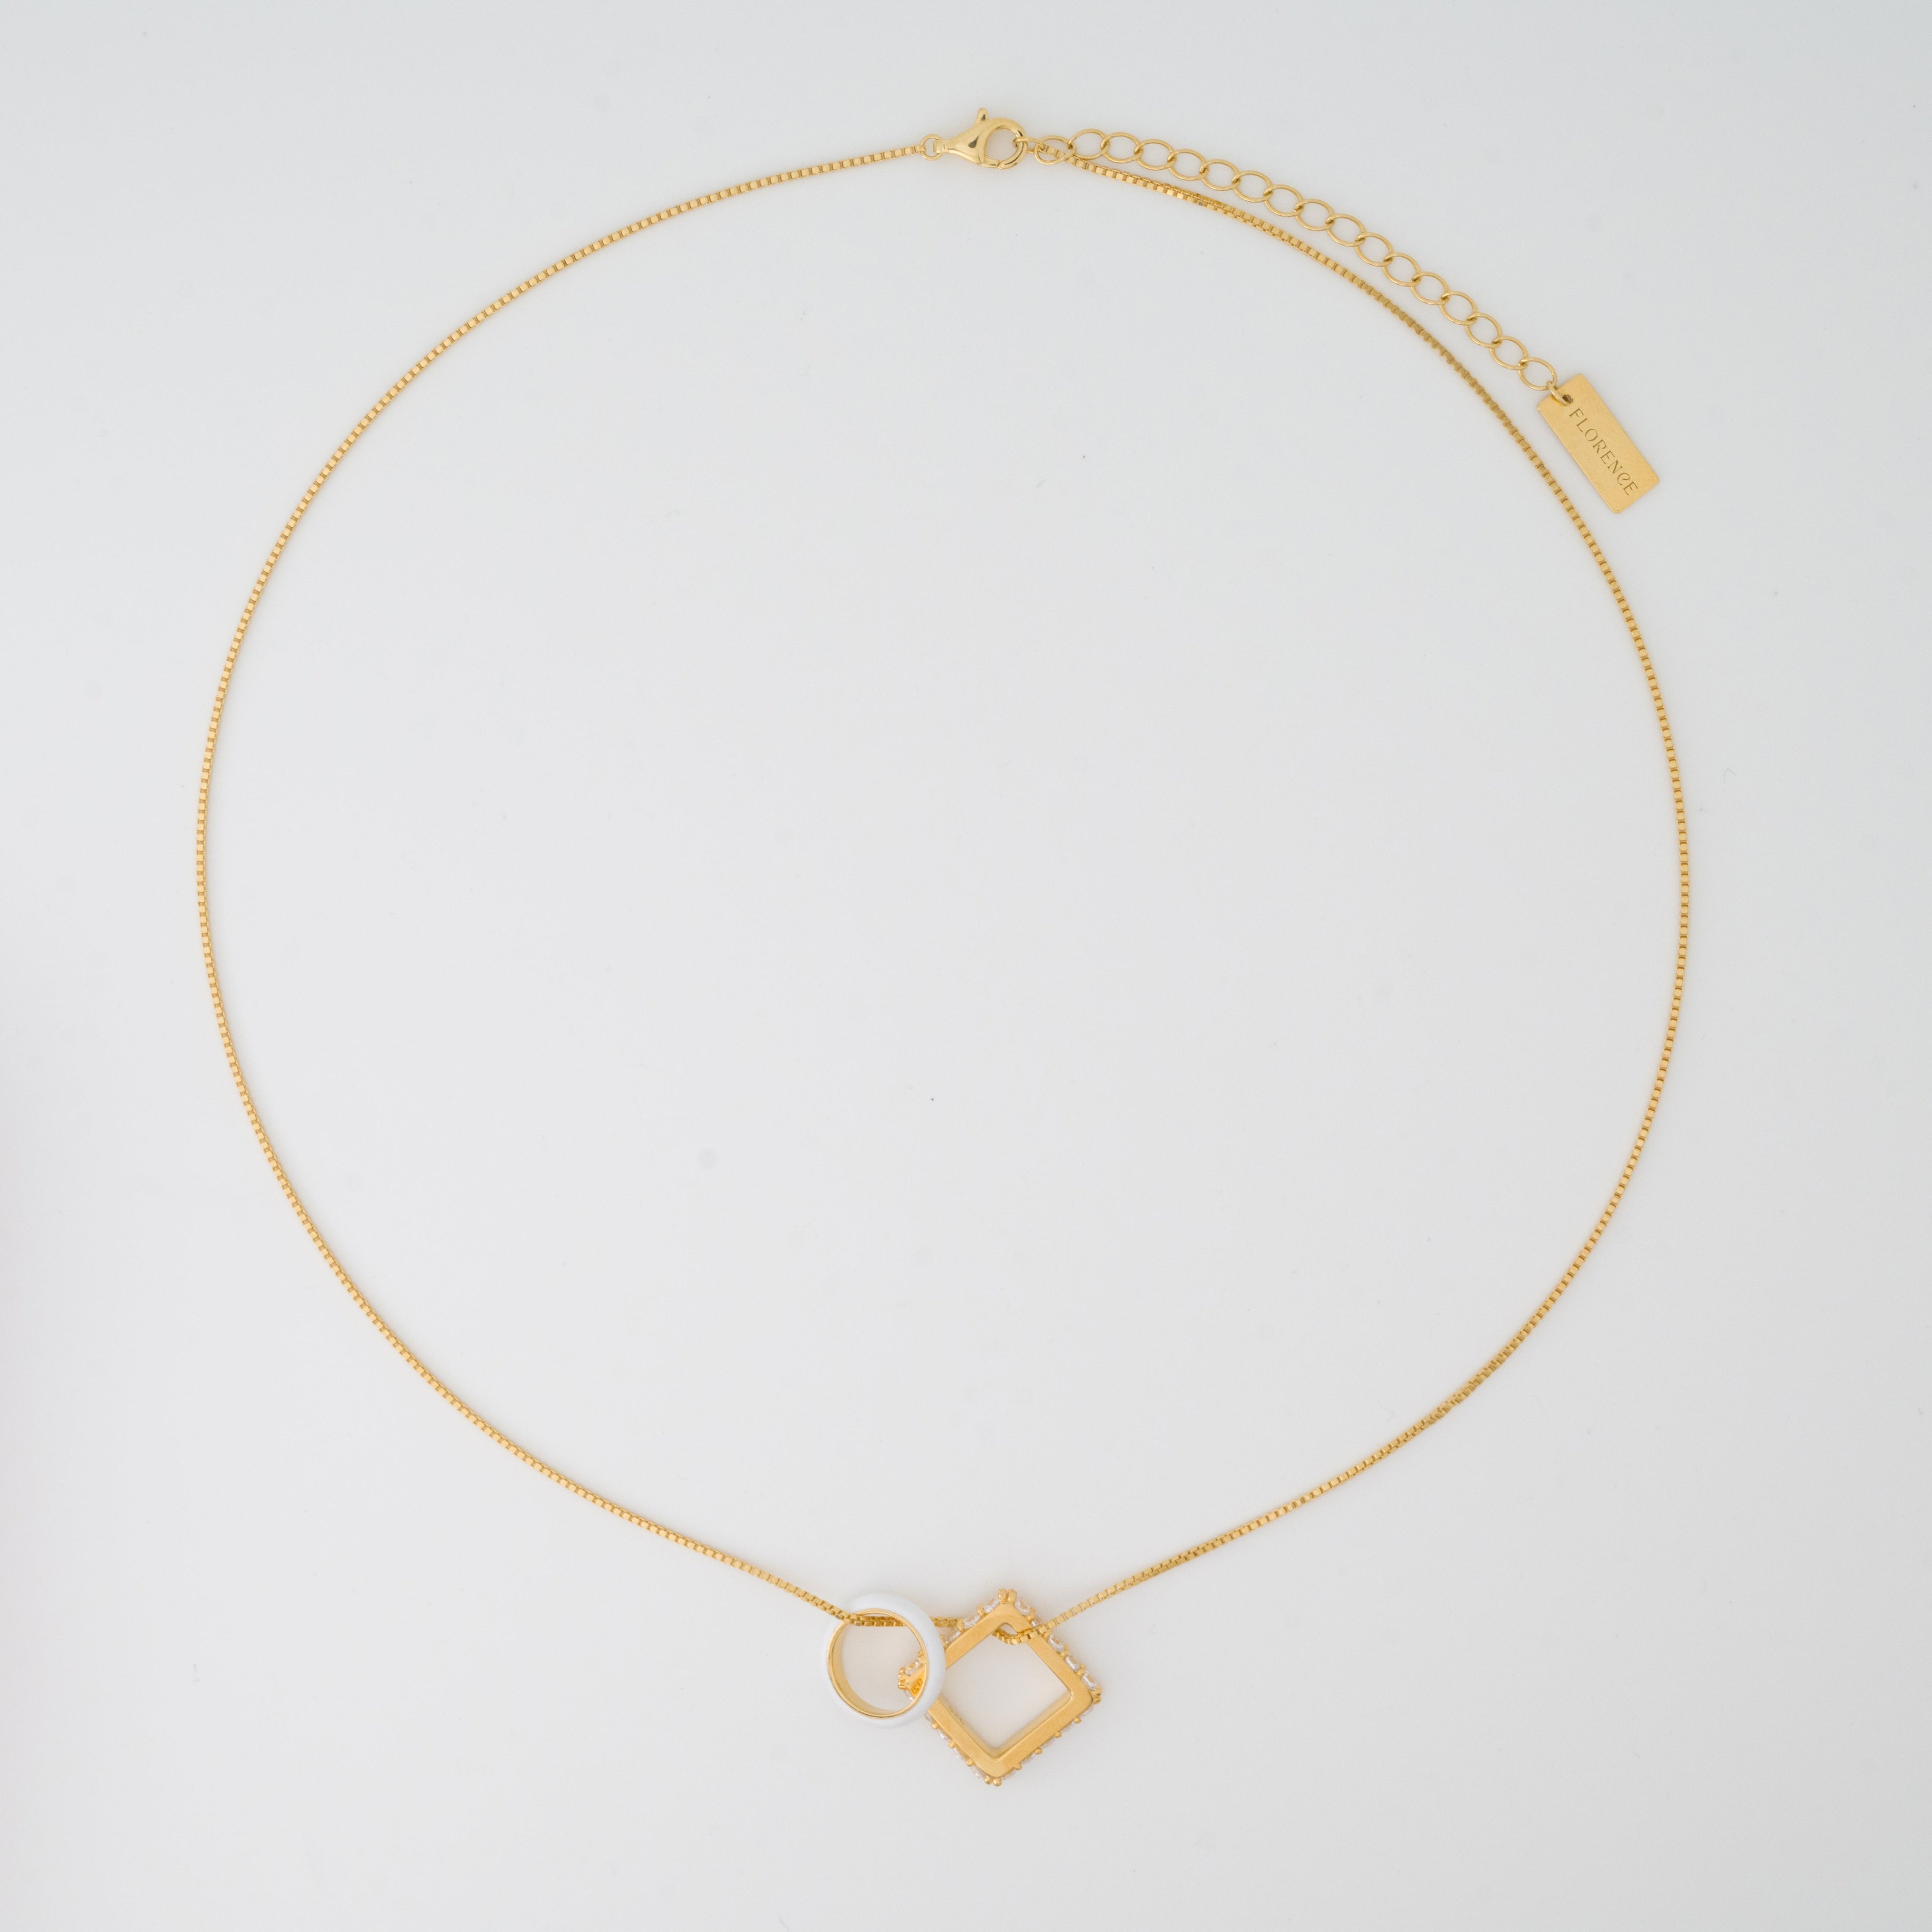 Nemy Stones and White Enamel Hoops Gold Necklace